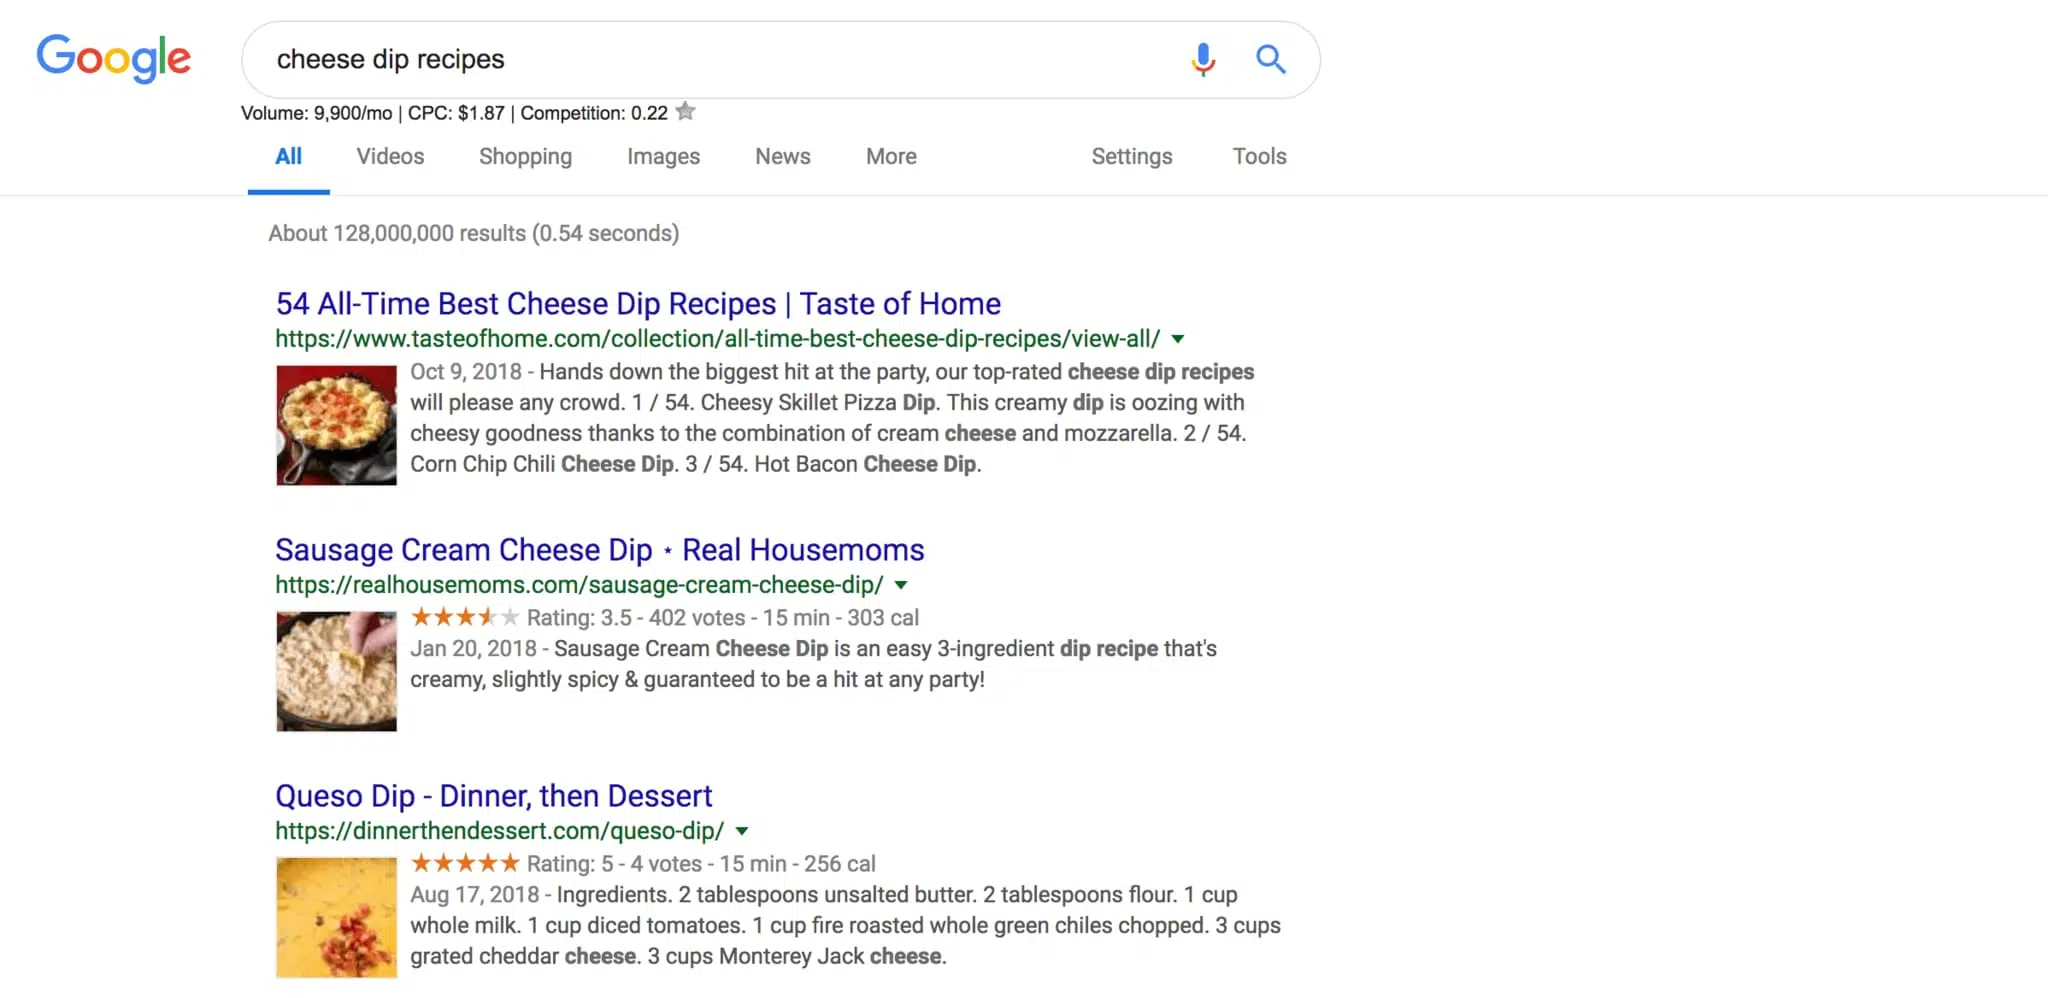 rich snippet about cheese dips in google SERPs